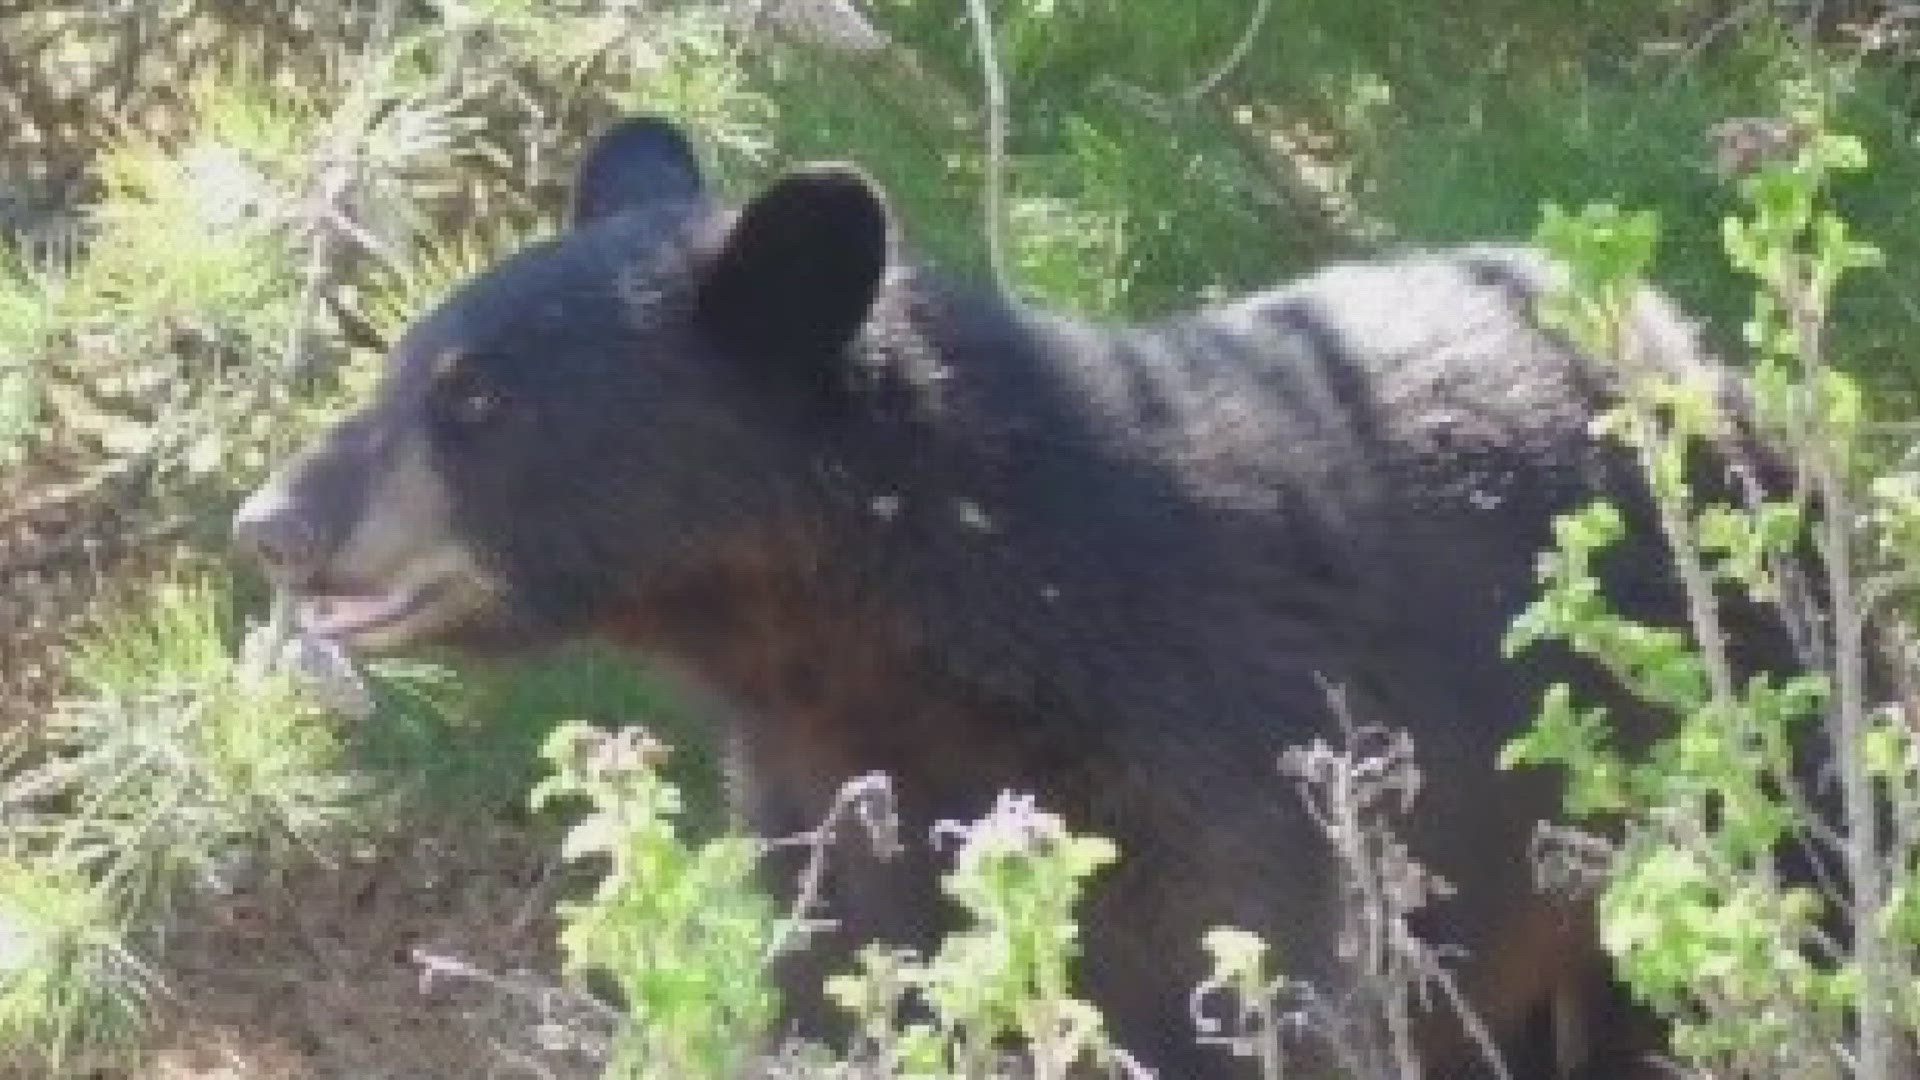 Police and the Maine Warden Service said they planned to keep an eye on the bear and "leave it alone" until or unless it leaves the area on its own.